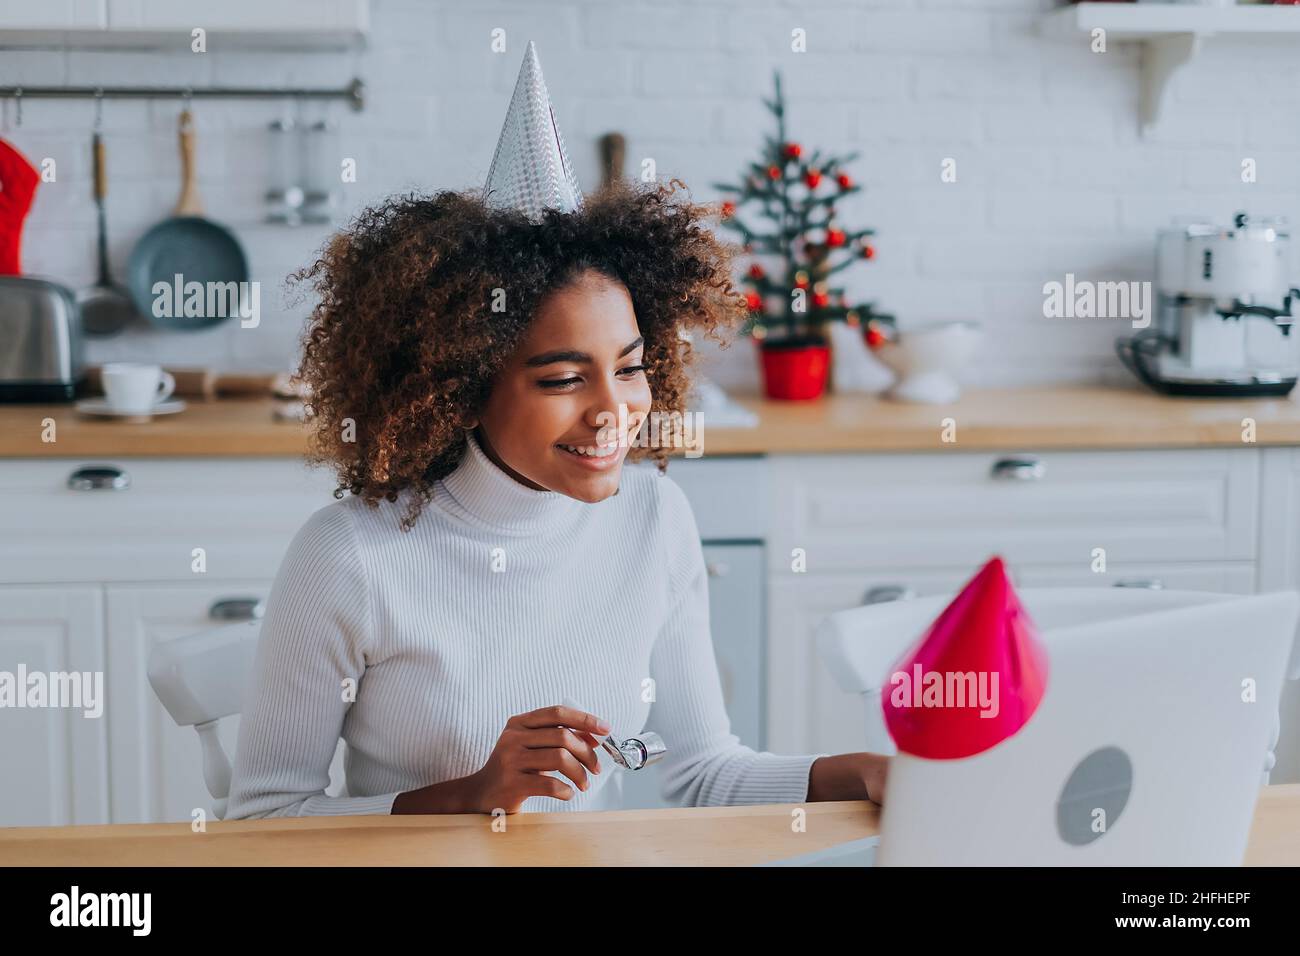 A beautiful black girl with a lush hairstyle in a festive hat on her head celebrates her birthday online by video chat sitting at home in the kitchen with a laptop, sends greetings online during quarantine. Stock Photo